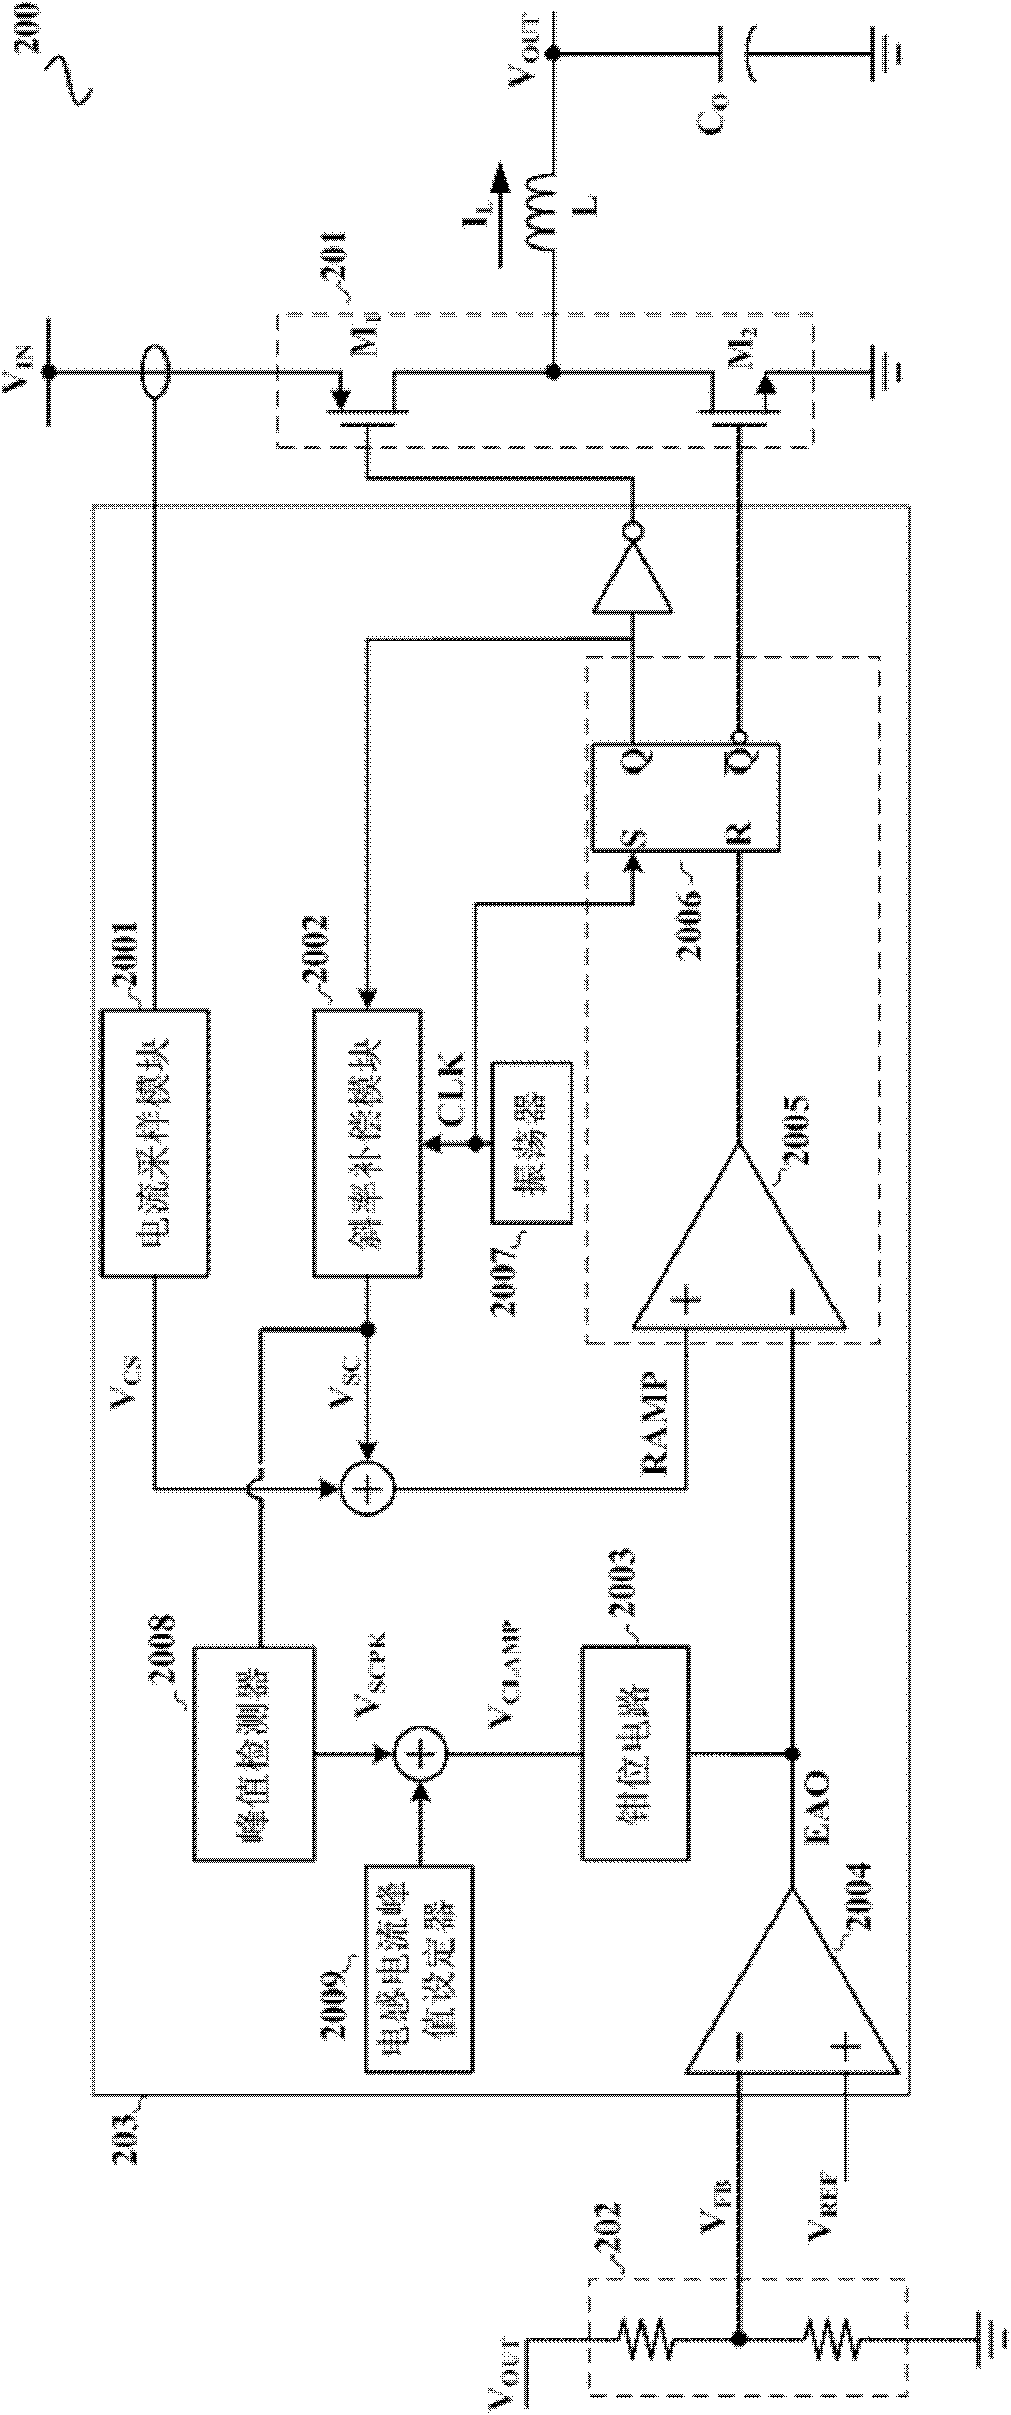 Direct current converter and control circuit and method for the direct current converter